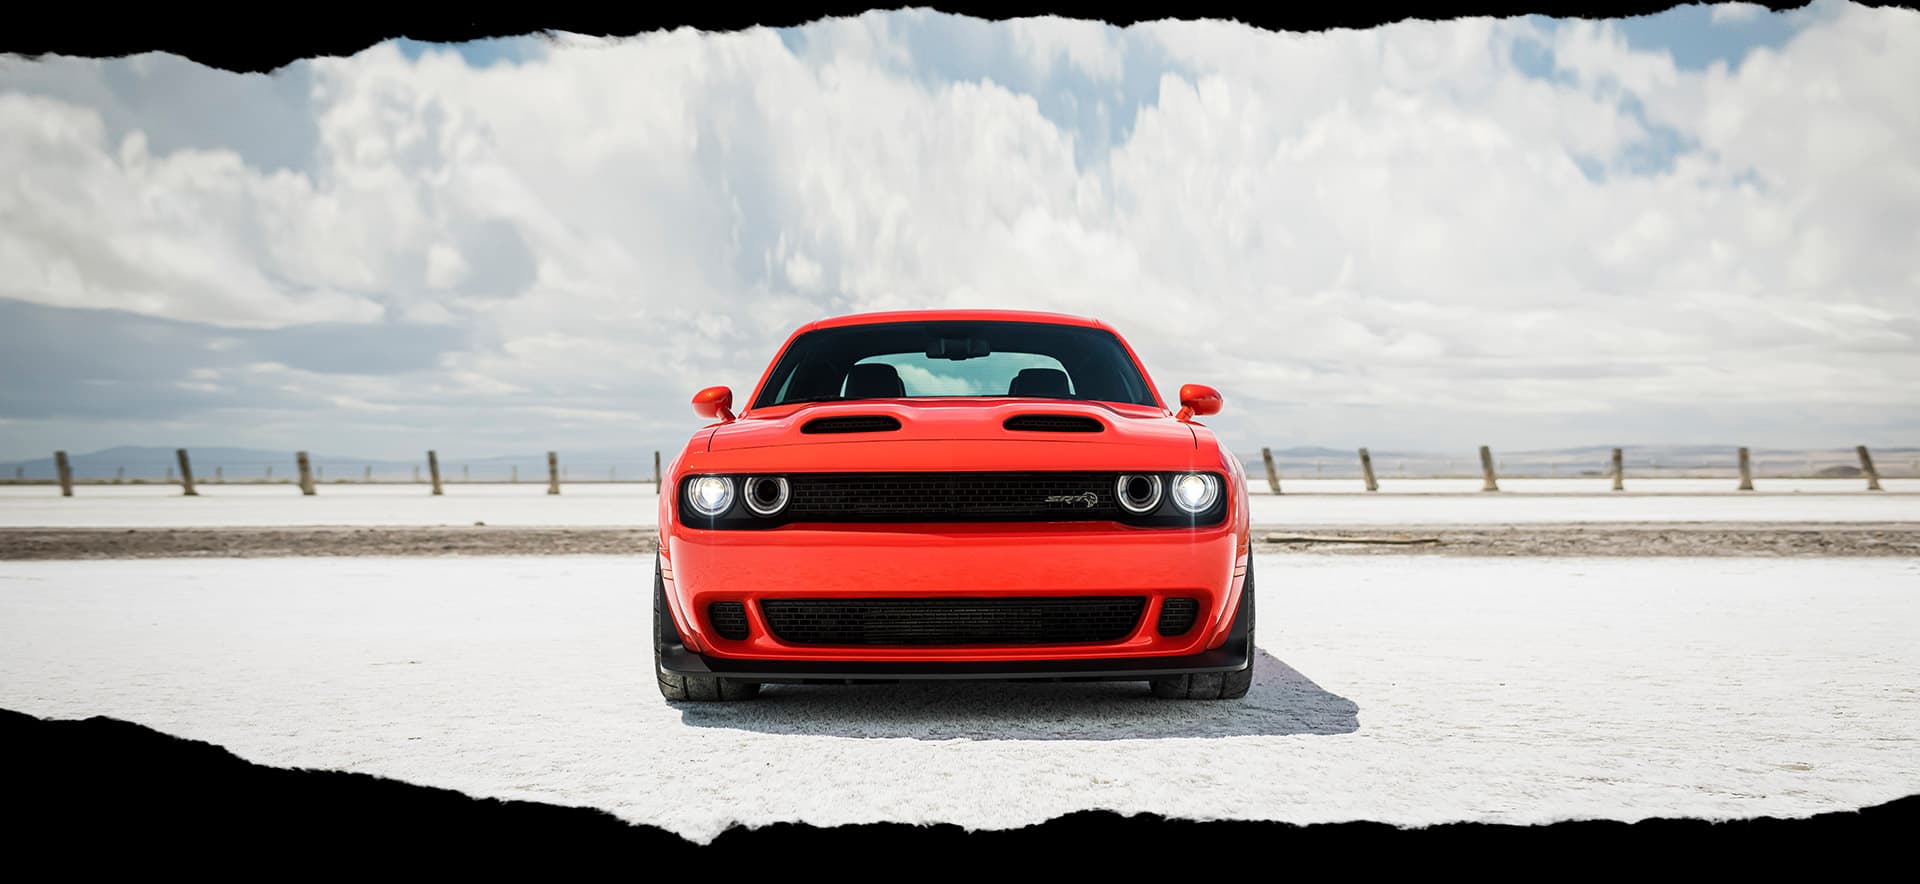 dodge challenger models fastest to slowest 4 Dodge Challenger vs. Competitors  Compare Top Speed & More